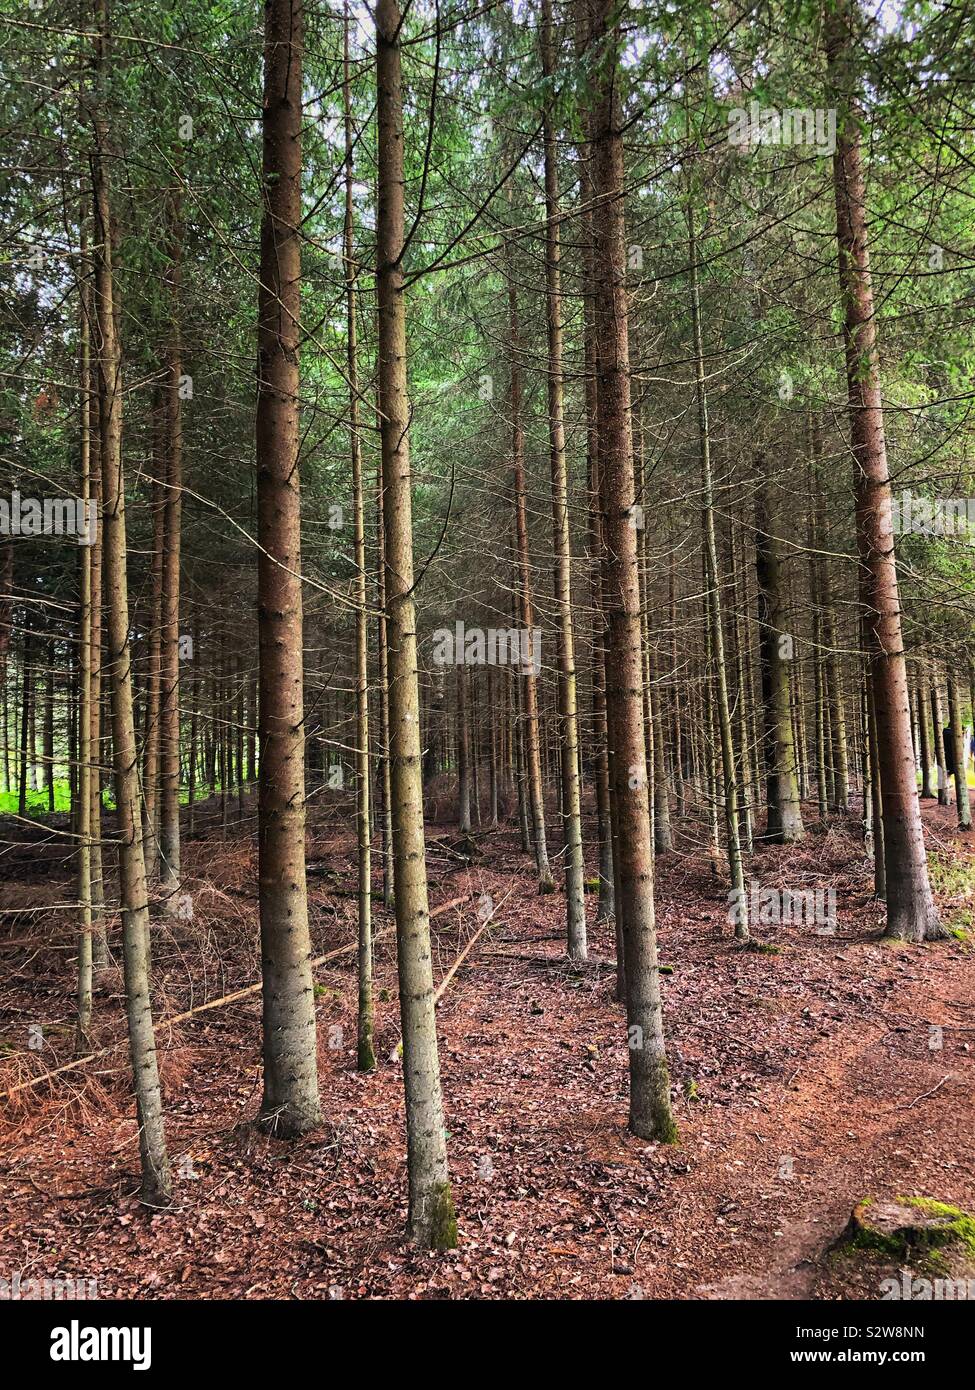 Forest with slim Norwegian spruce trees in shaded light. Akershus county, Norway. Stock Photo